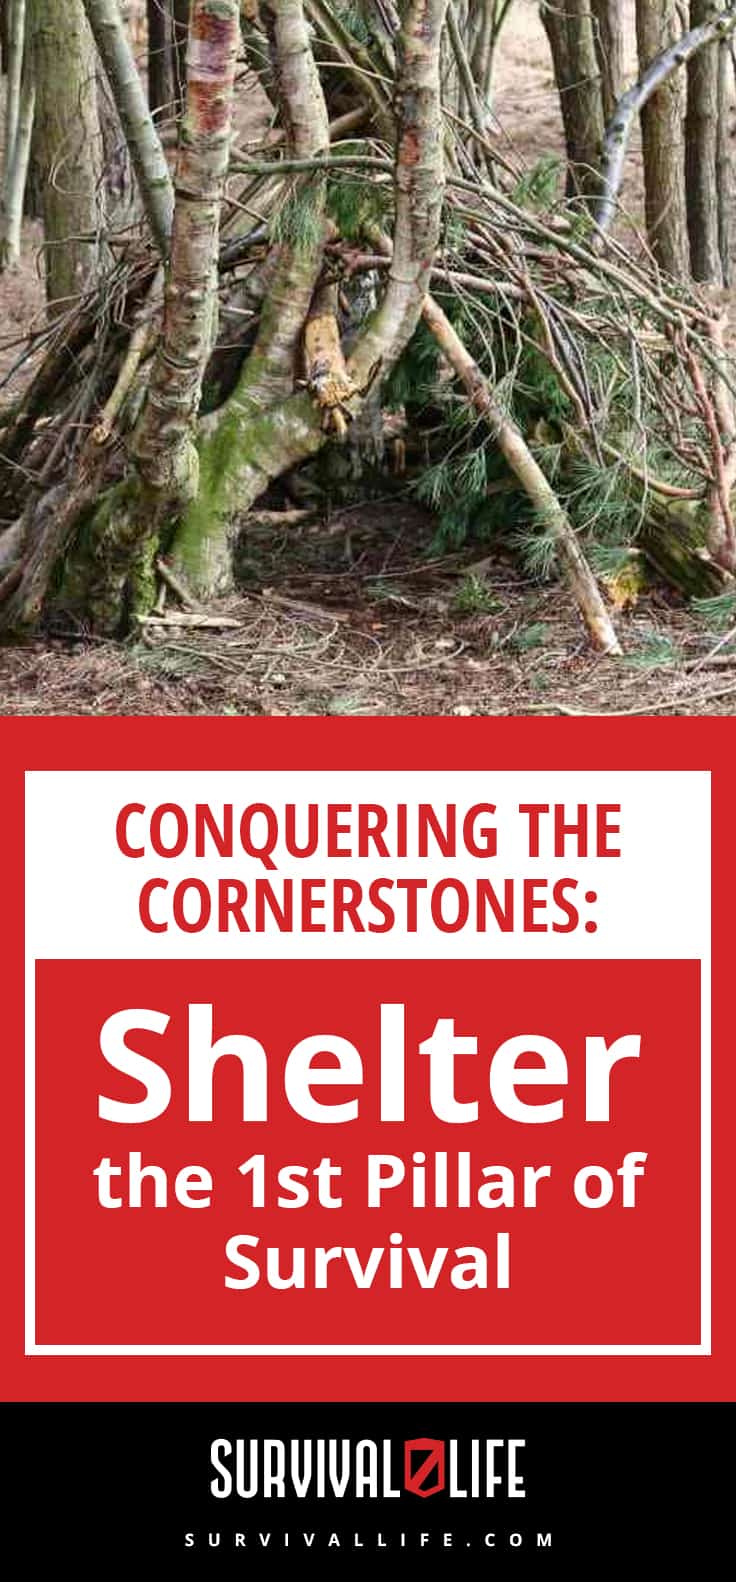 Shelter | Conquering the Cornerstones: Shelter - the 1st Pillar of Survival